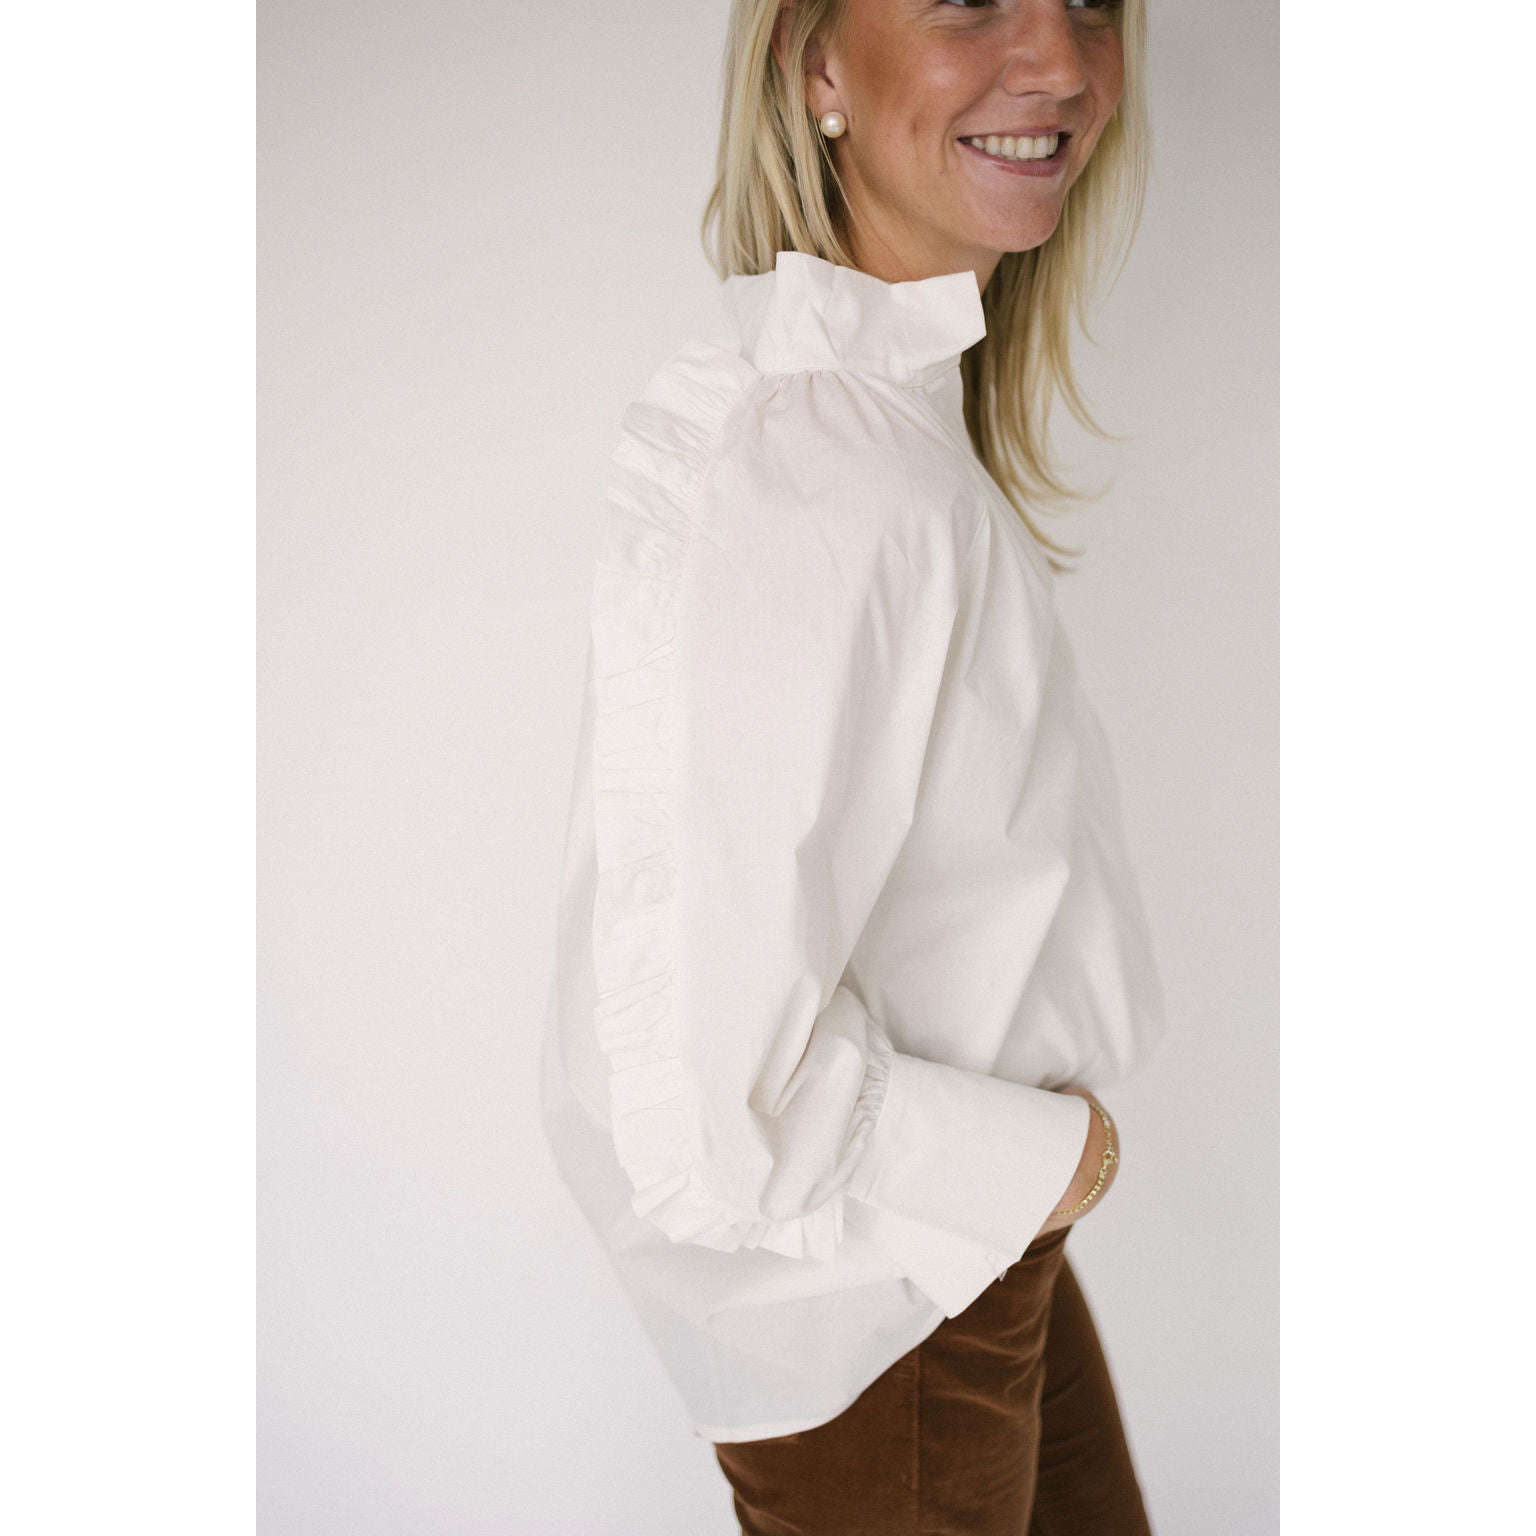 8.28 Boutique:Karlie Clothes,Karlie Clothes Poplin Ruffle Sleeve Top,Shirts & Tops